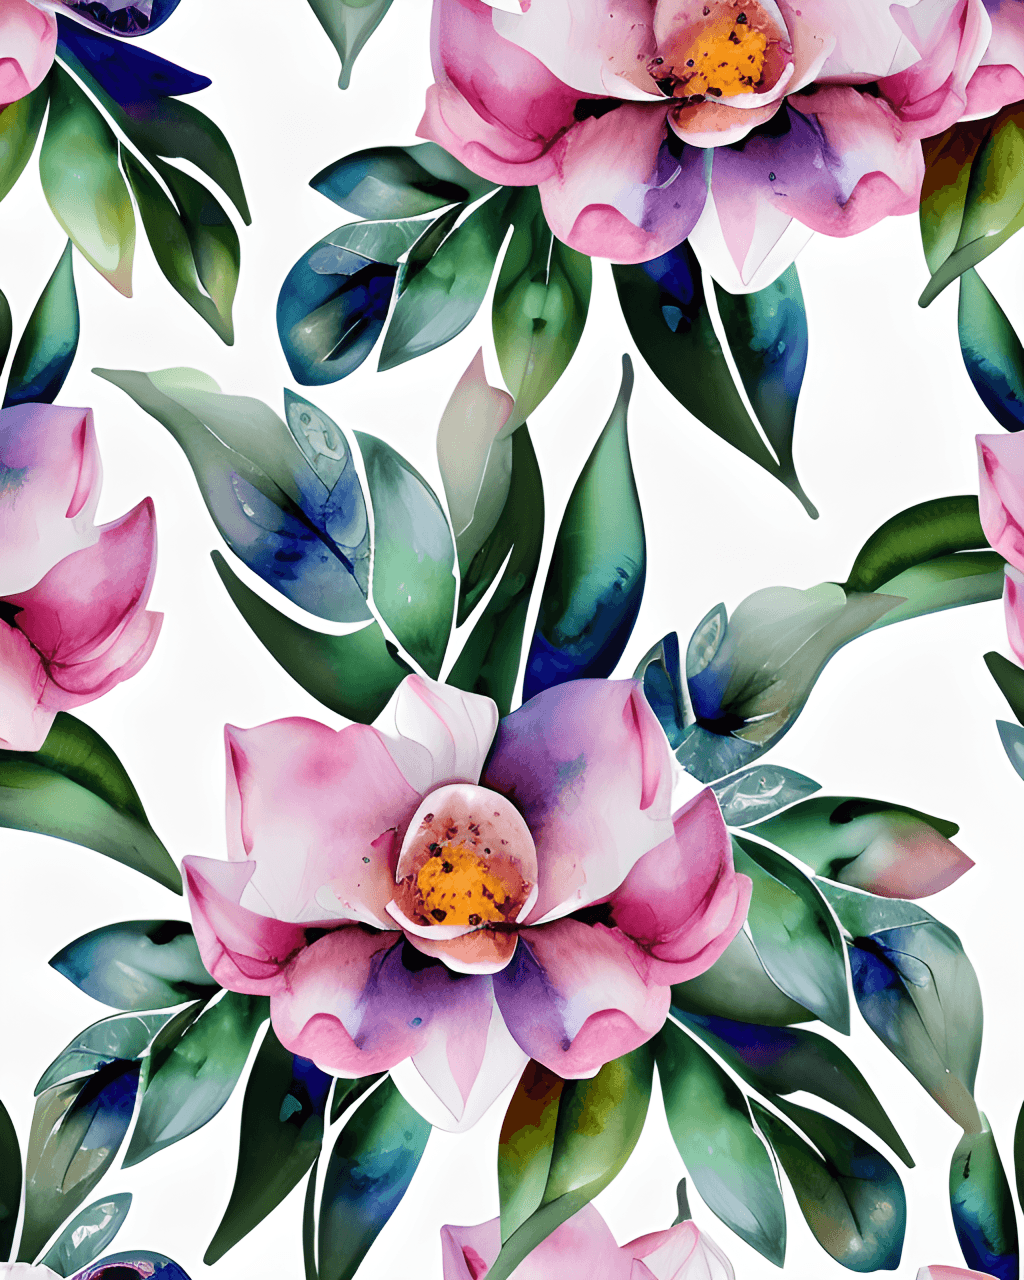 Spectacular Luxury Flowers Sublimation Watercolor Illustration with ...